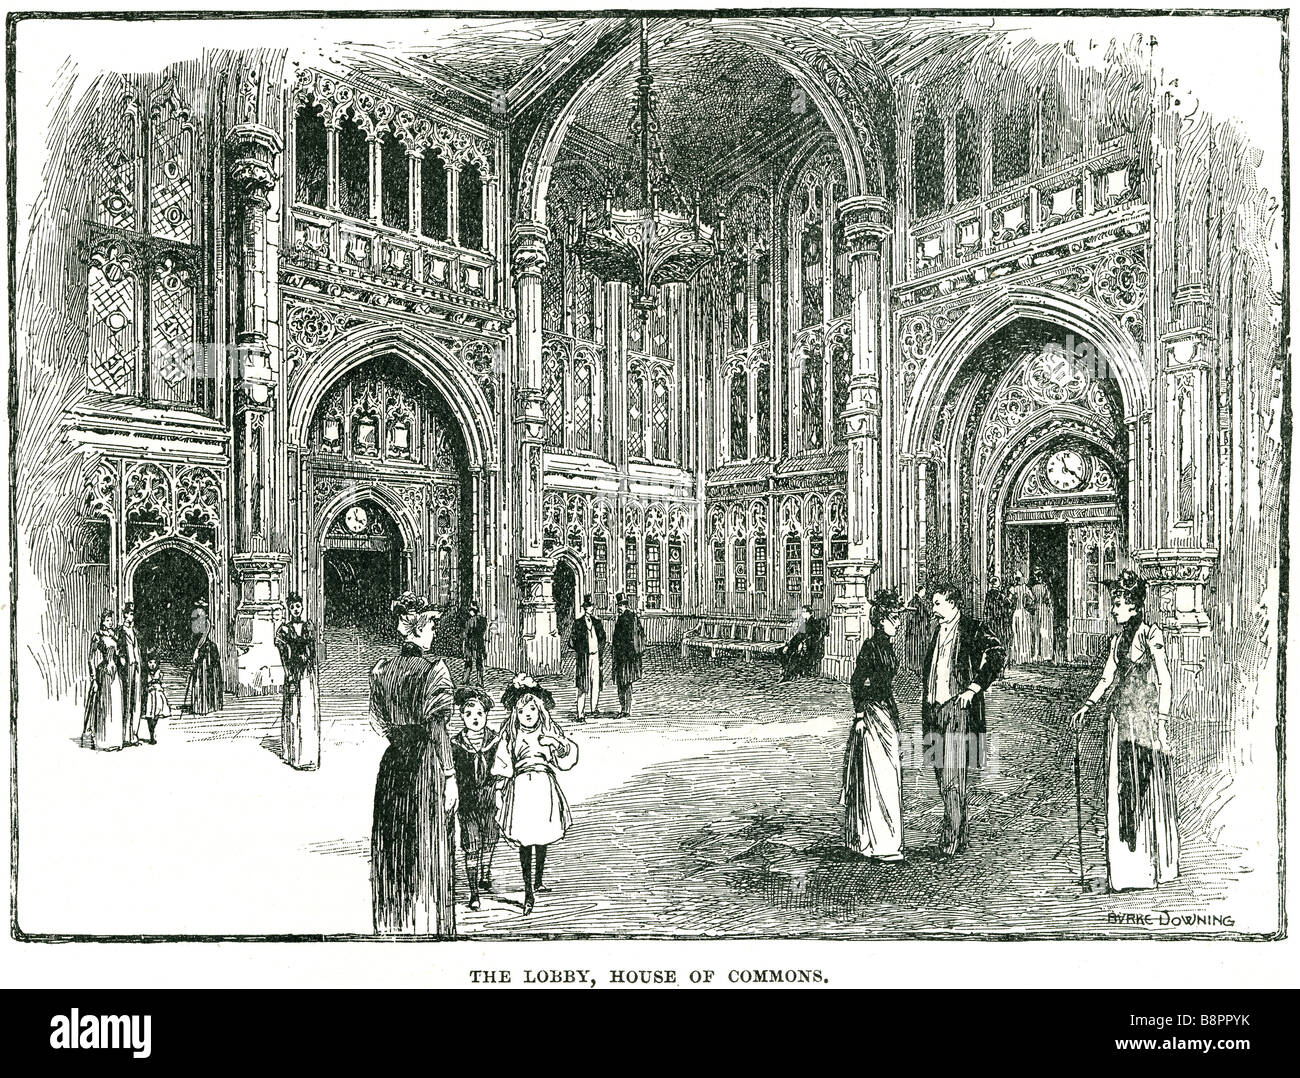 the lobby house of commons 1866 United Kingdom Parliament Palace of Westminster Stock Photo